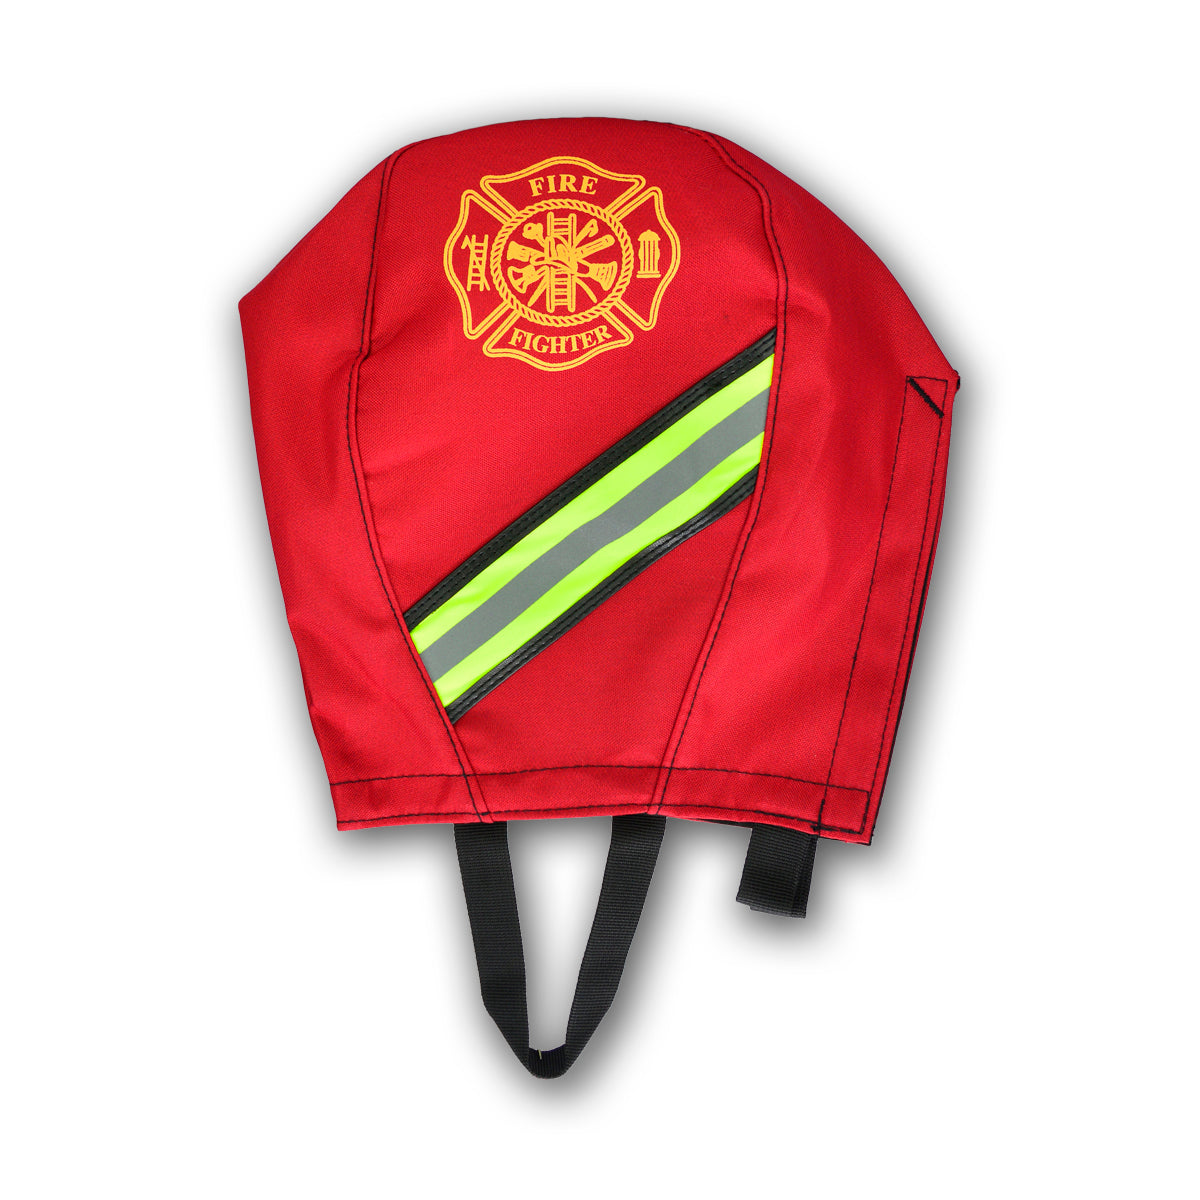 Lightning x Rolling Firefighter Turnout Gear Bag - Red - One Size - Fire Safety USA